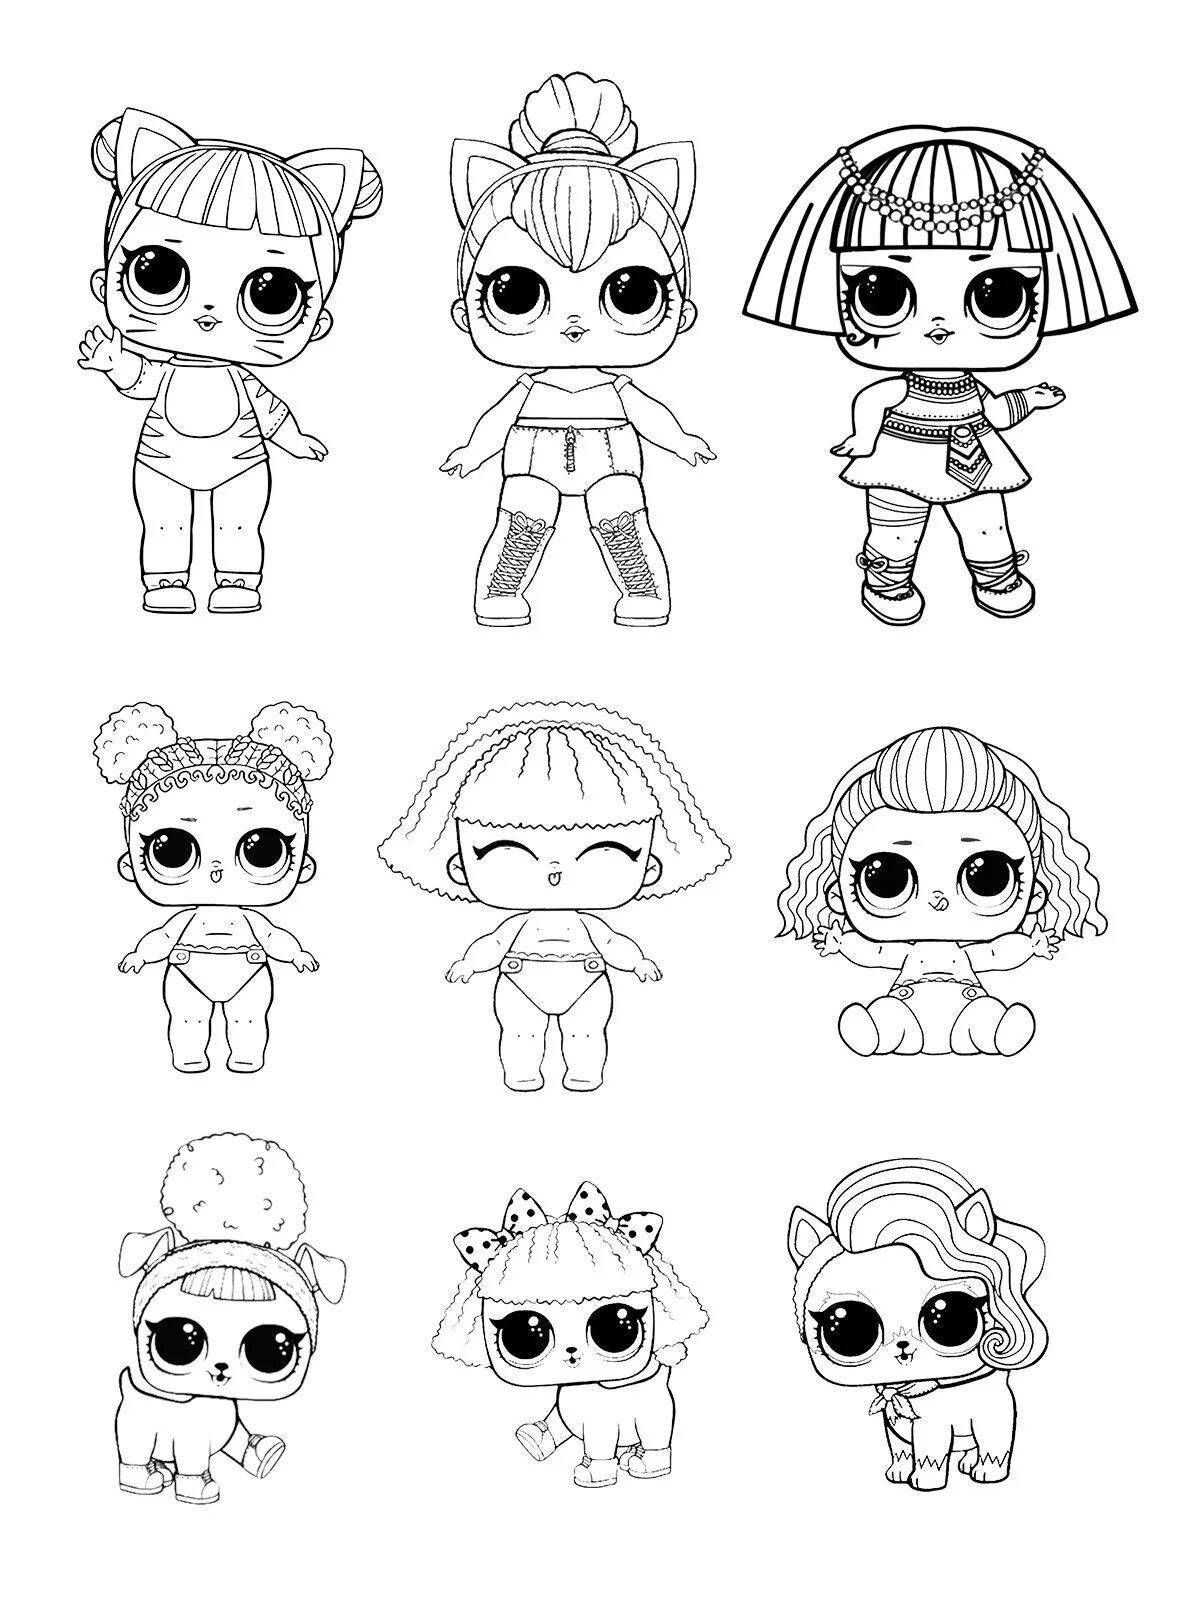 Colorific doll lol little sisters coloring page